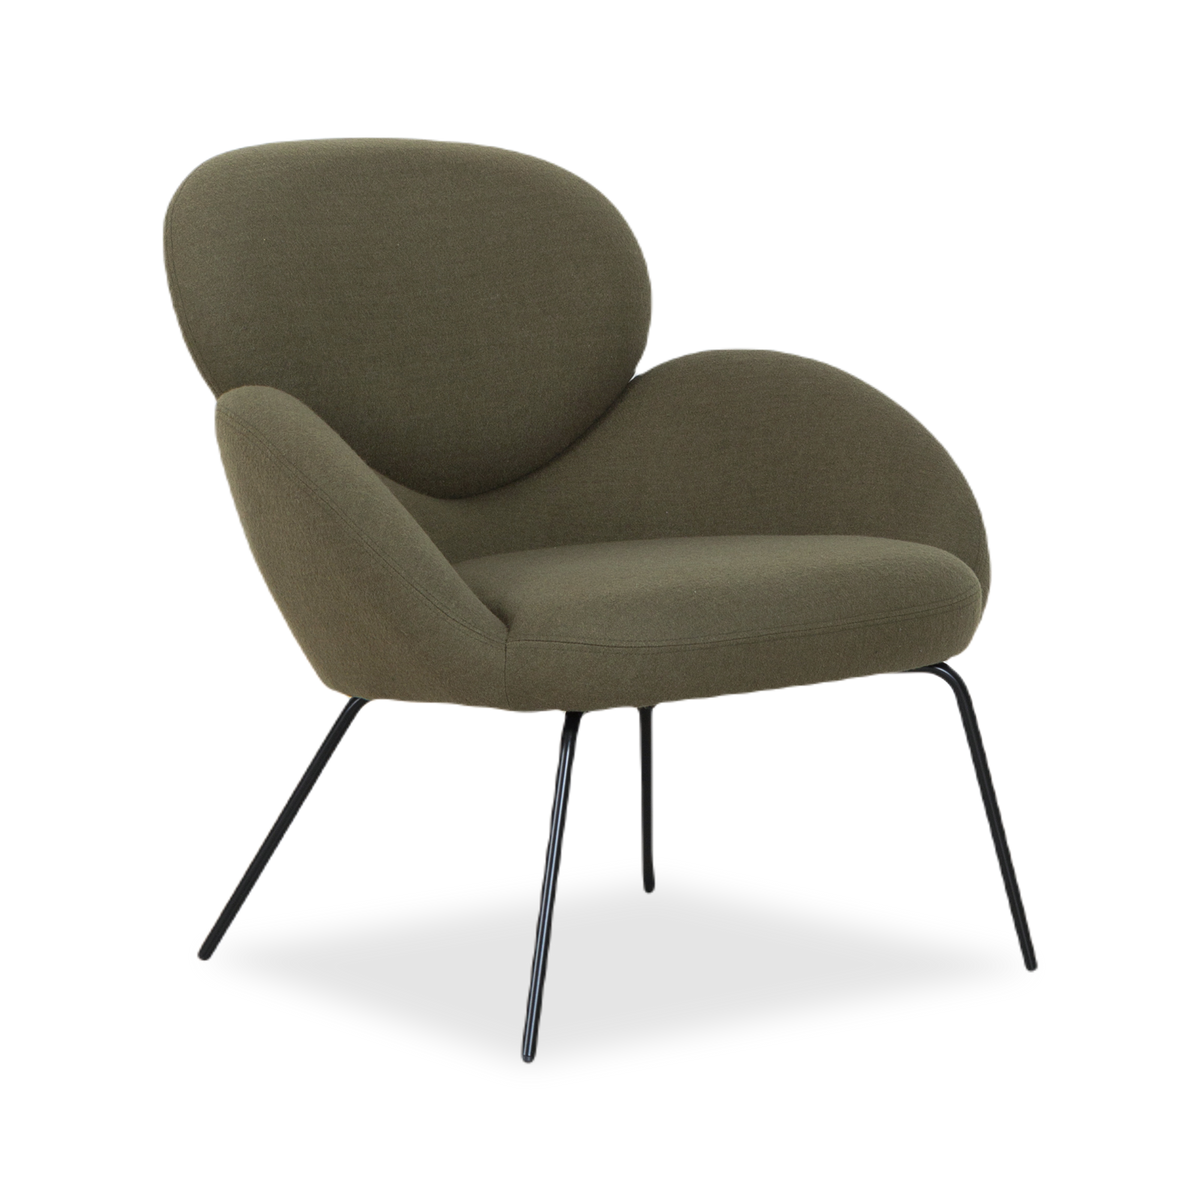 Inspired by 70s postmodernism, the Meyer Lounge chair offers gentle curves and expressive forms.